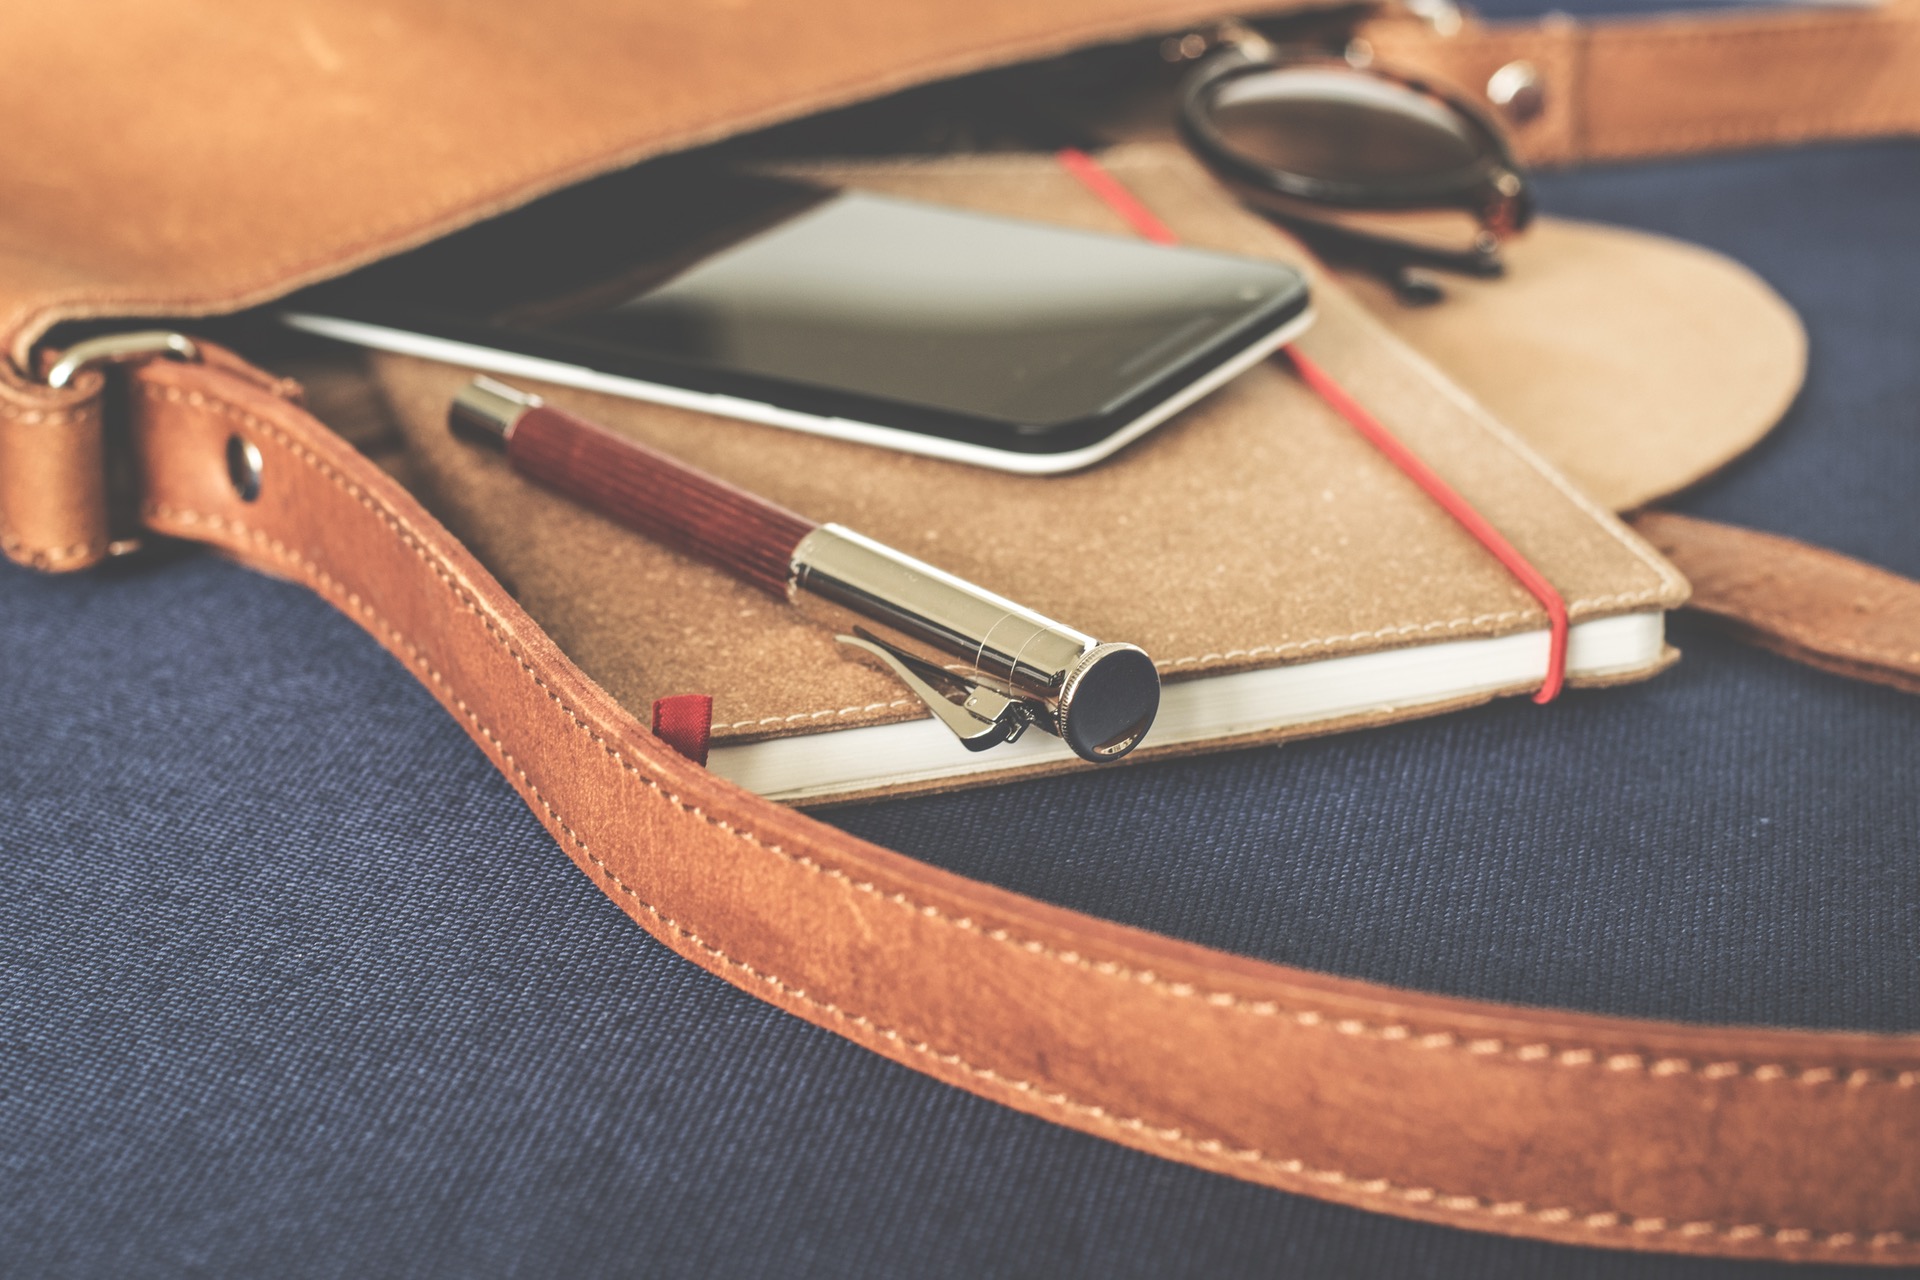 Accessory bag, pen, phone, notebook and sunglasses